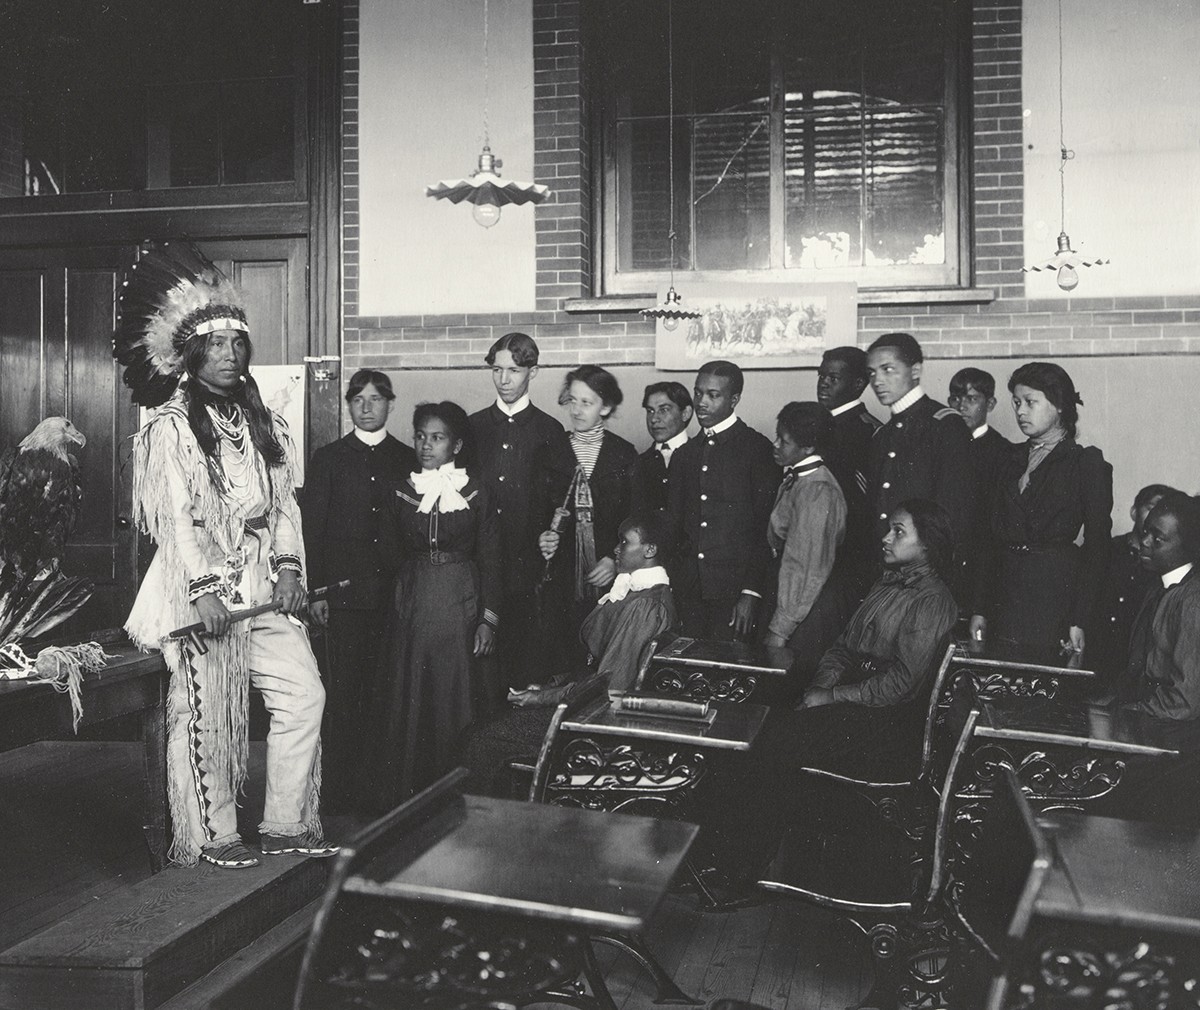 A Native American man wearing a feathered headdress stands in a classroom of students.